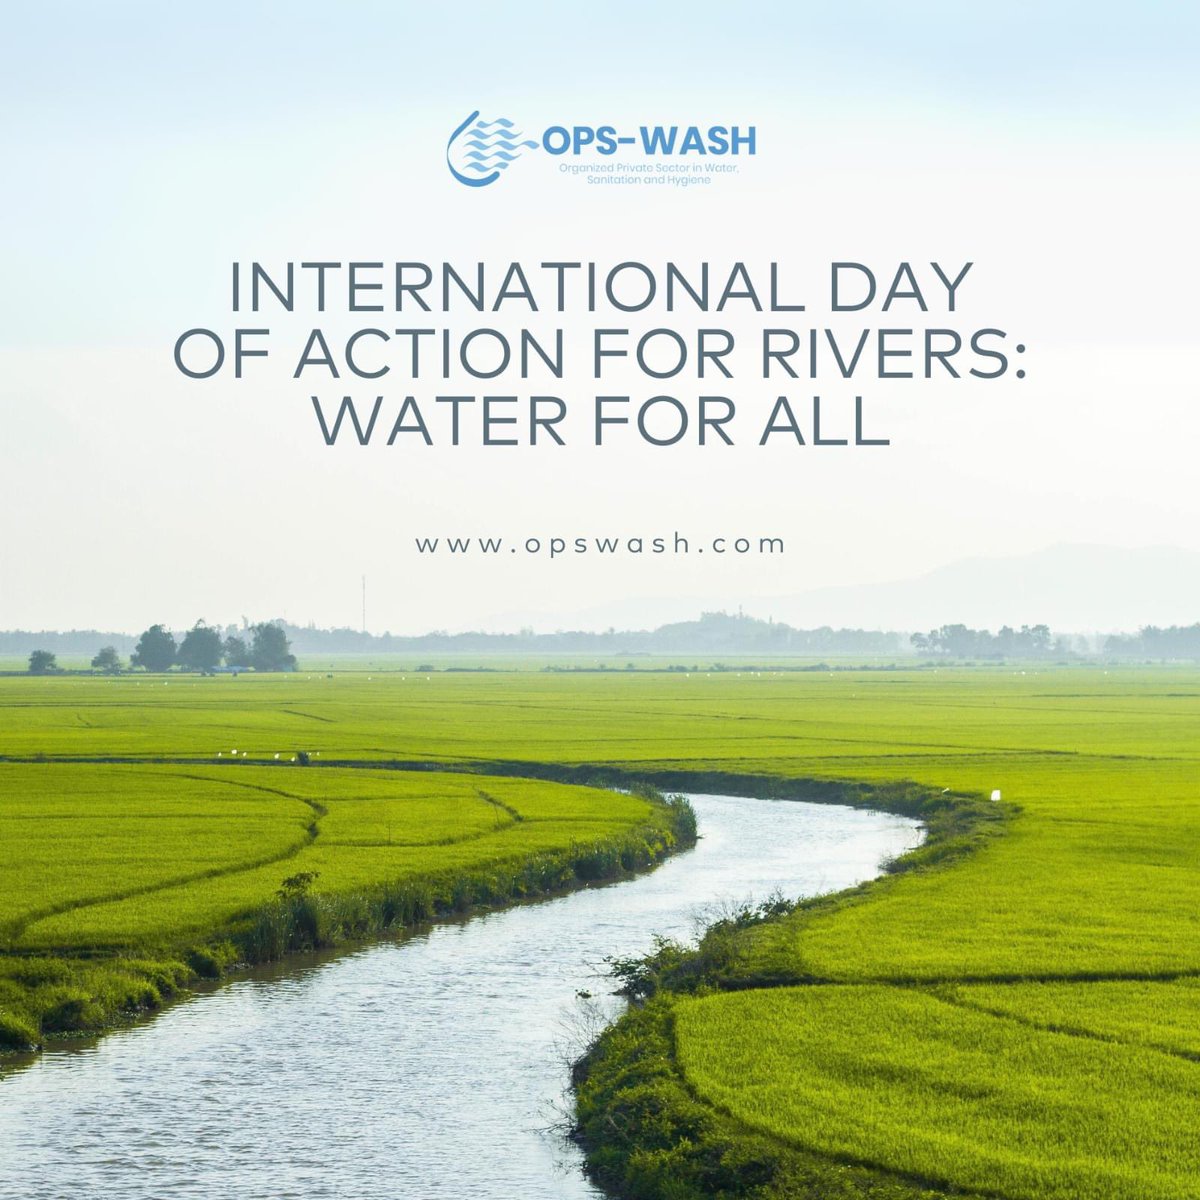 The International Day of Action for Rivers – when diverse communities worldwide come together with one voice to affirm that rivers are vital and need our protection. This year’s theme focuses on “Water for All”. #Water #Sanitation #Goal6 #SDG6 💧